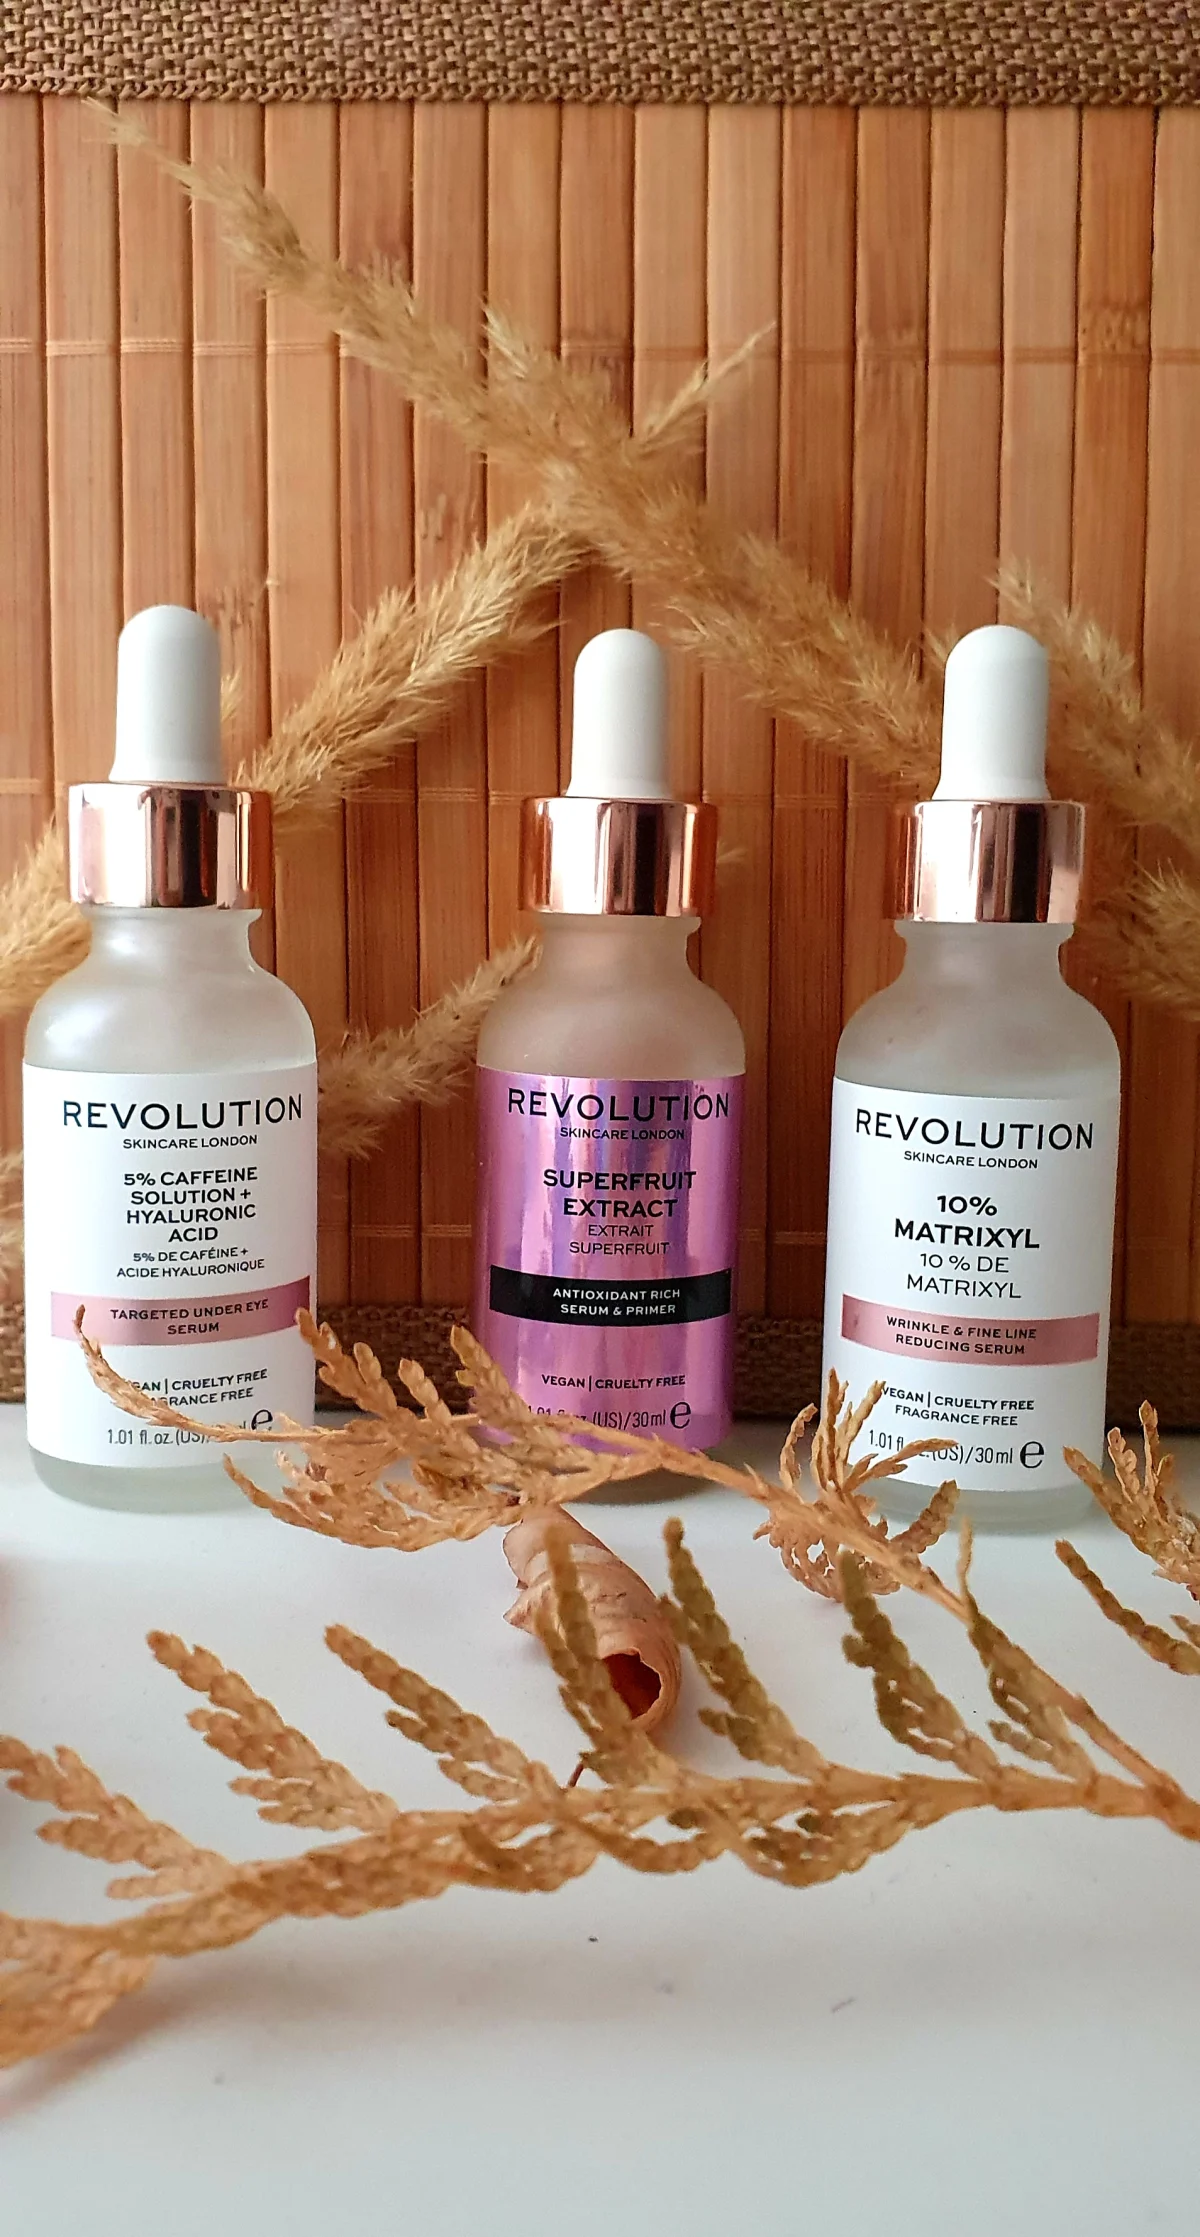 Revolution Skincare Superfruit Extract - review image